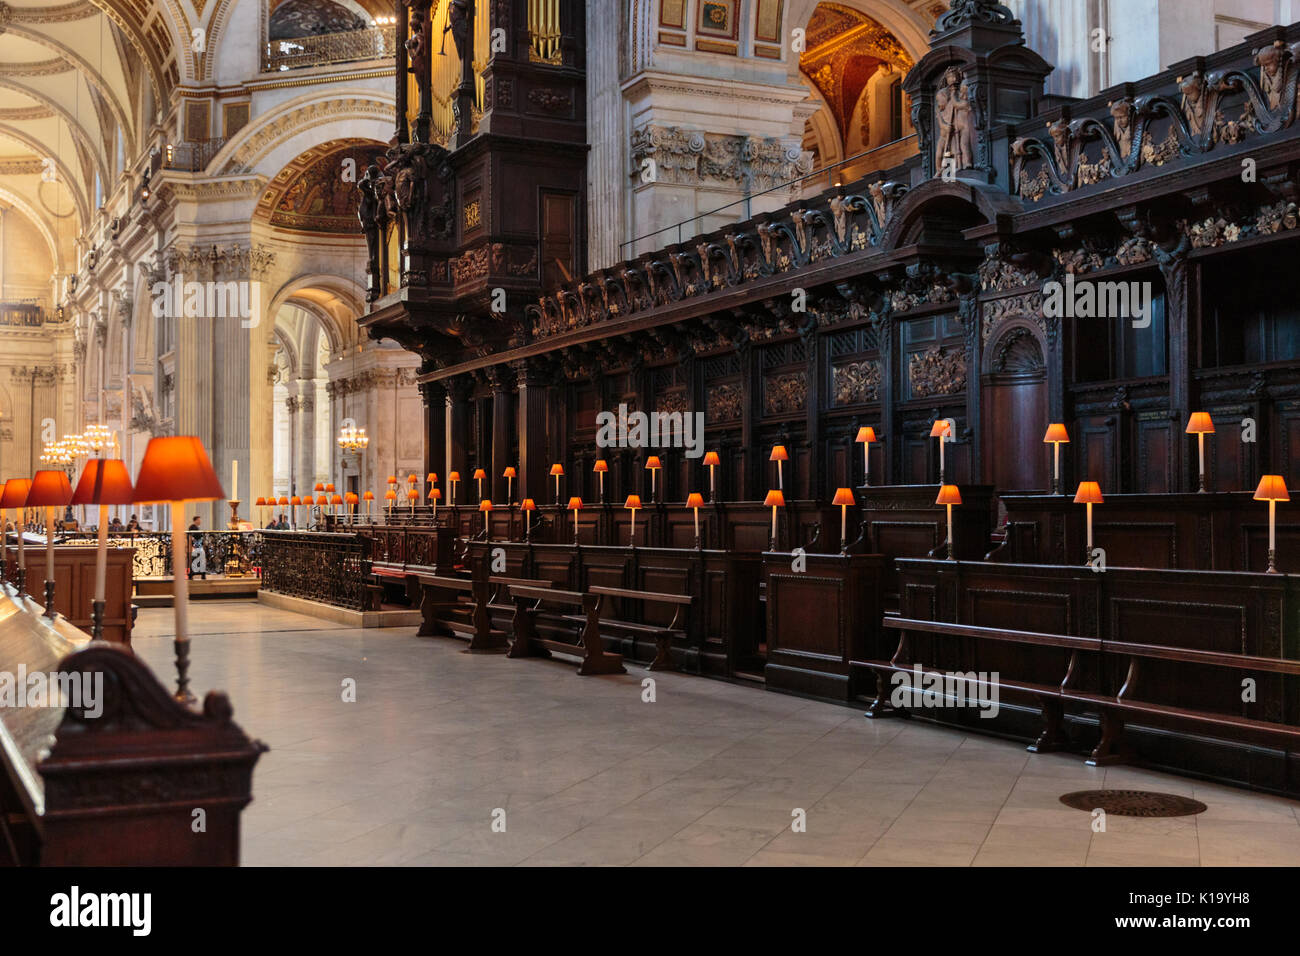 St Paul's Cathedral interior, view of the quire and choir stalls, London UK Stock Photo